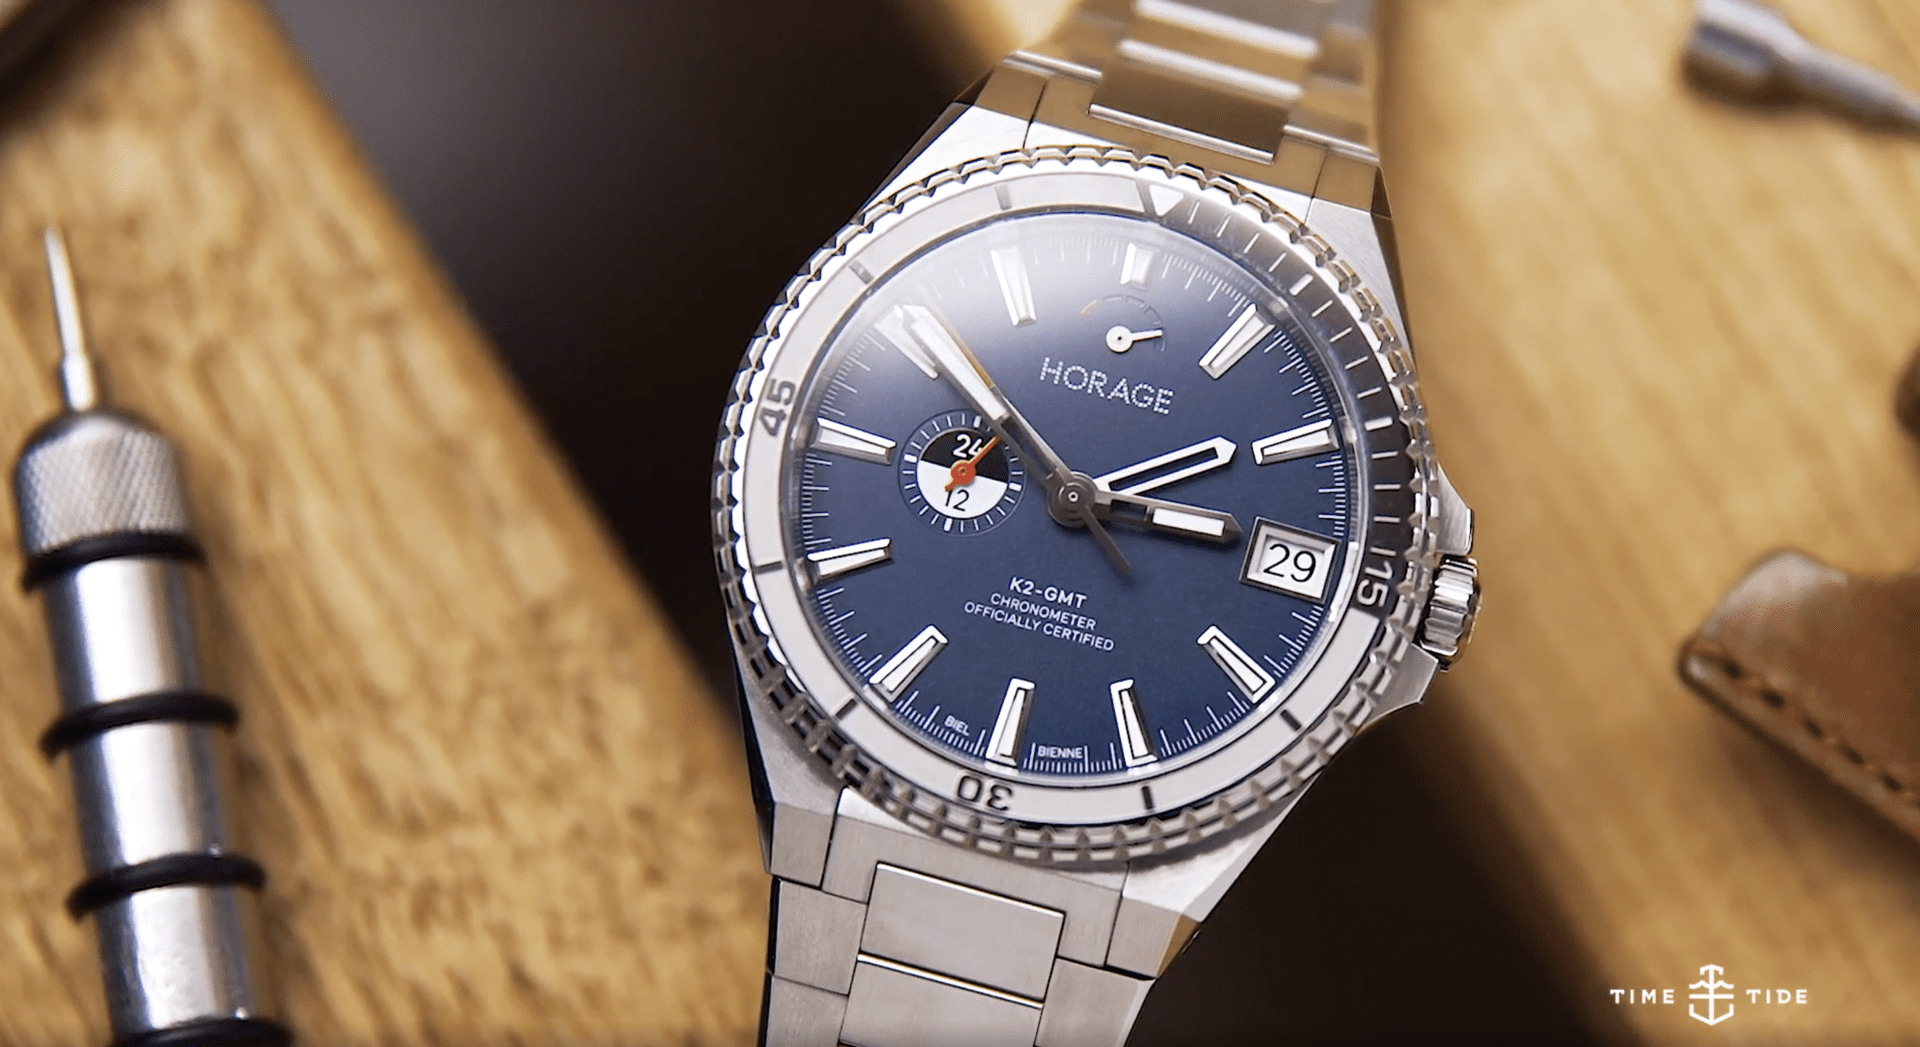 HANDS ON: The Horage Supersede is an indy GMT that overdelivers on expectations